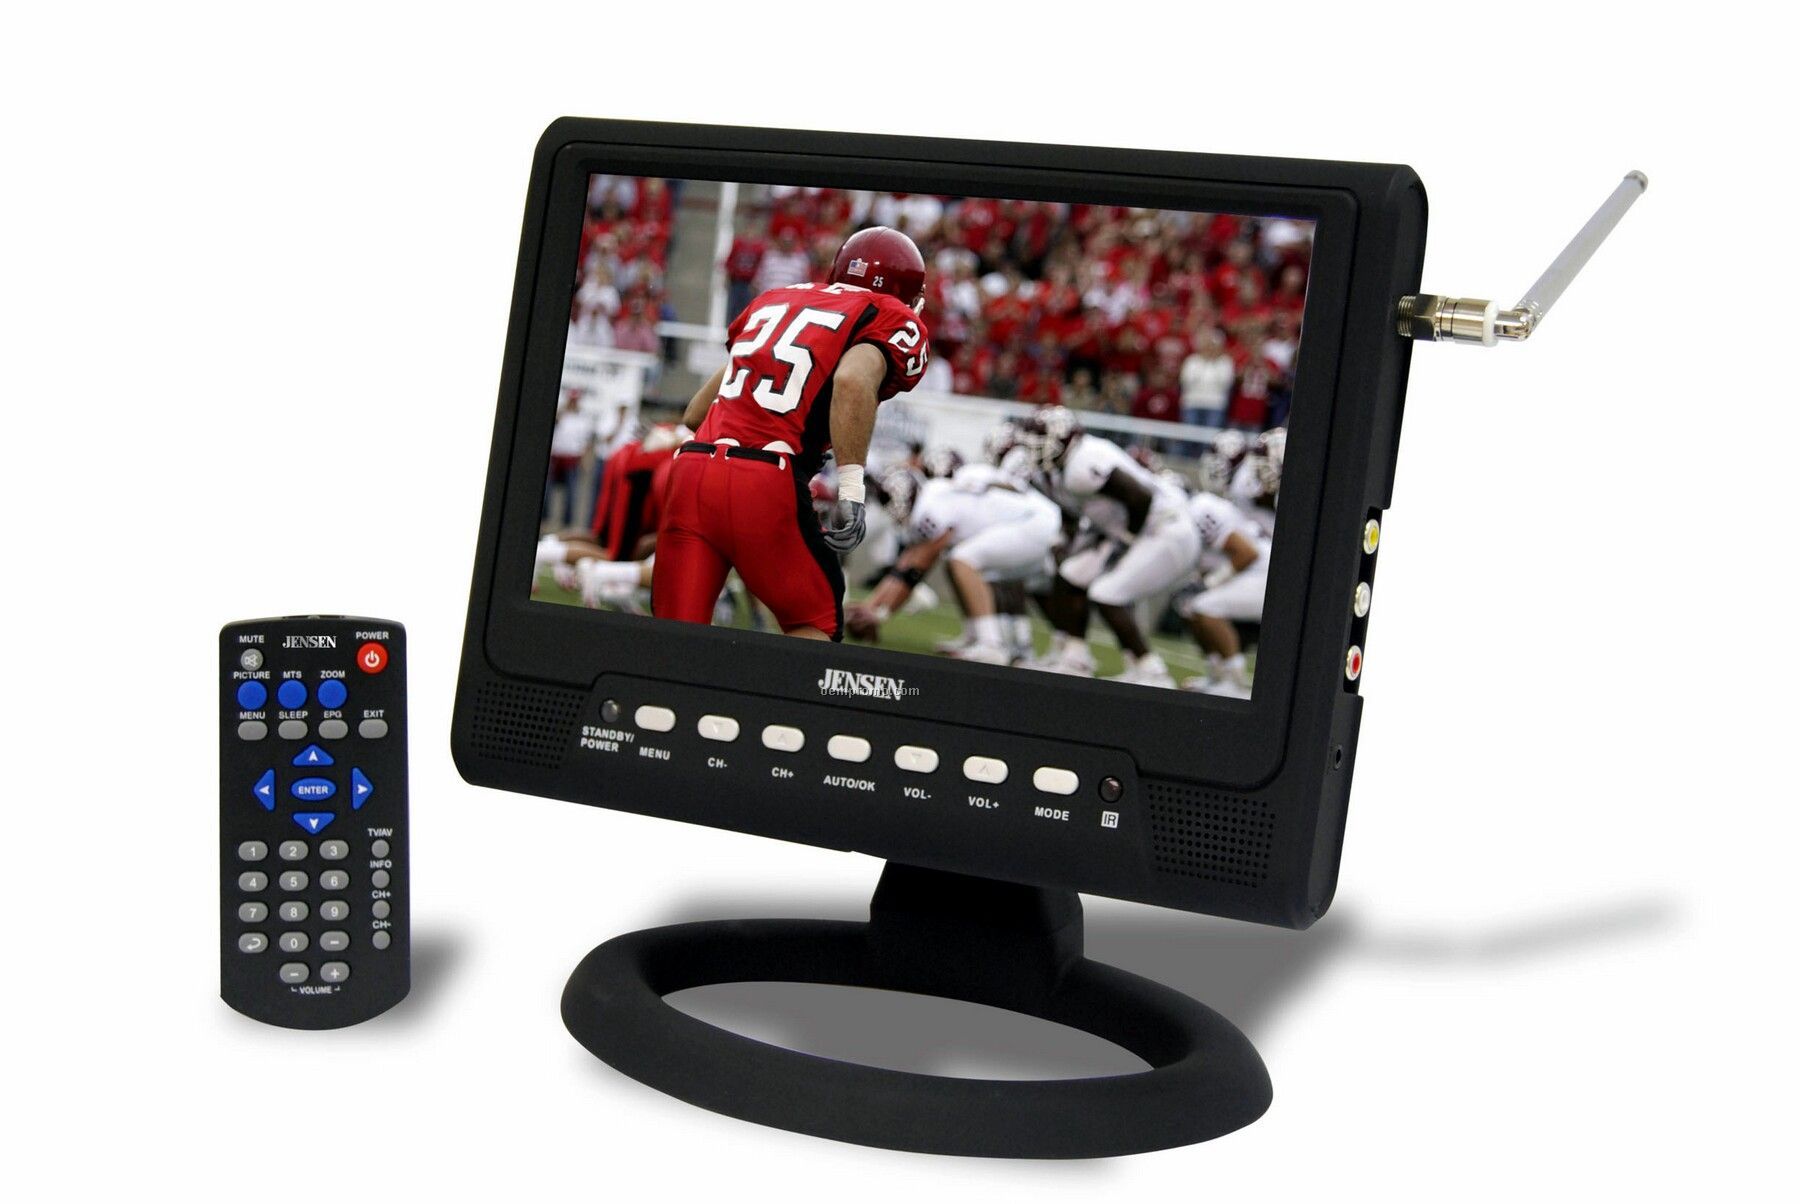 Tft Color Lcd Television With Built In Digital Atsc Tuner